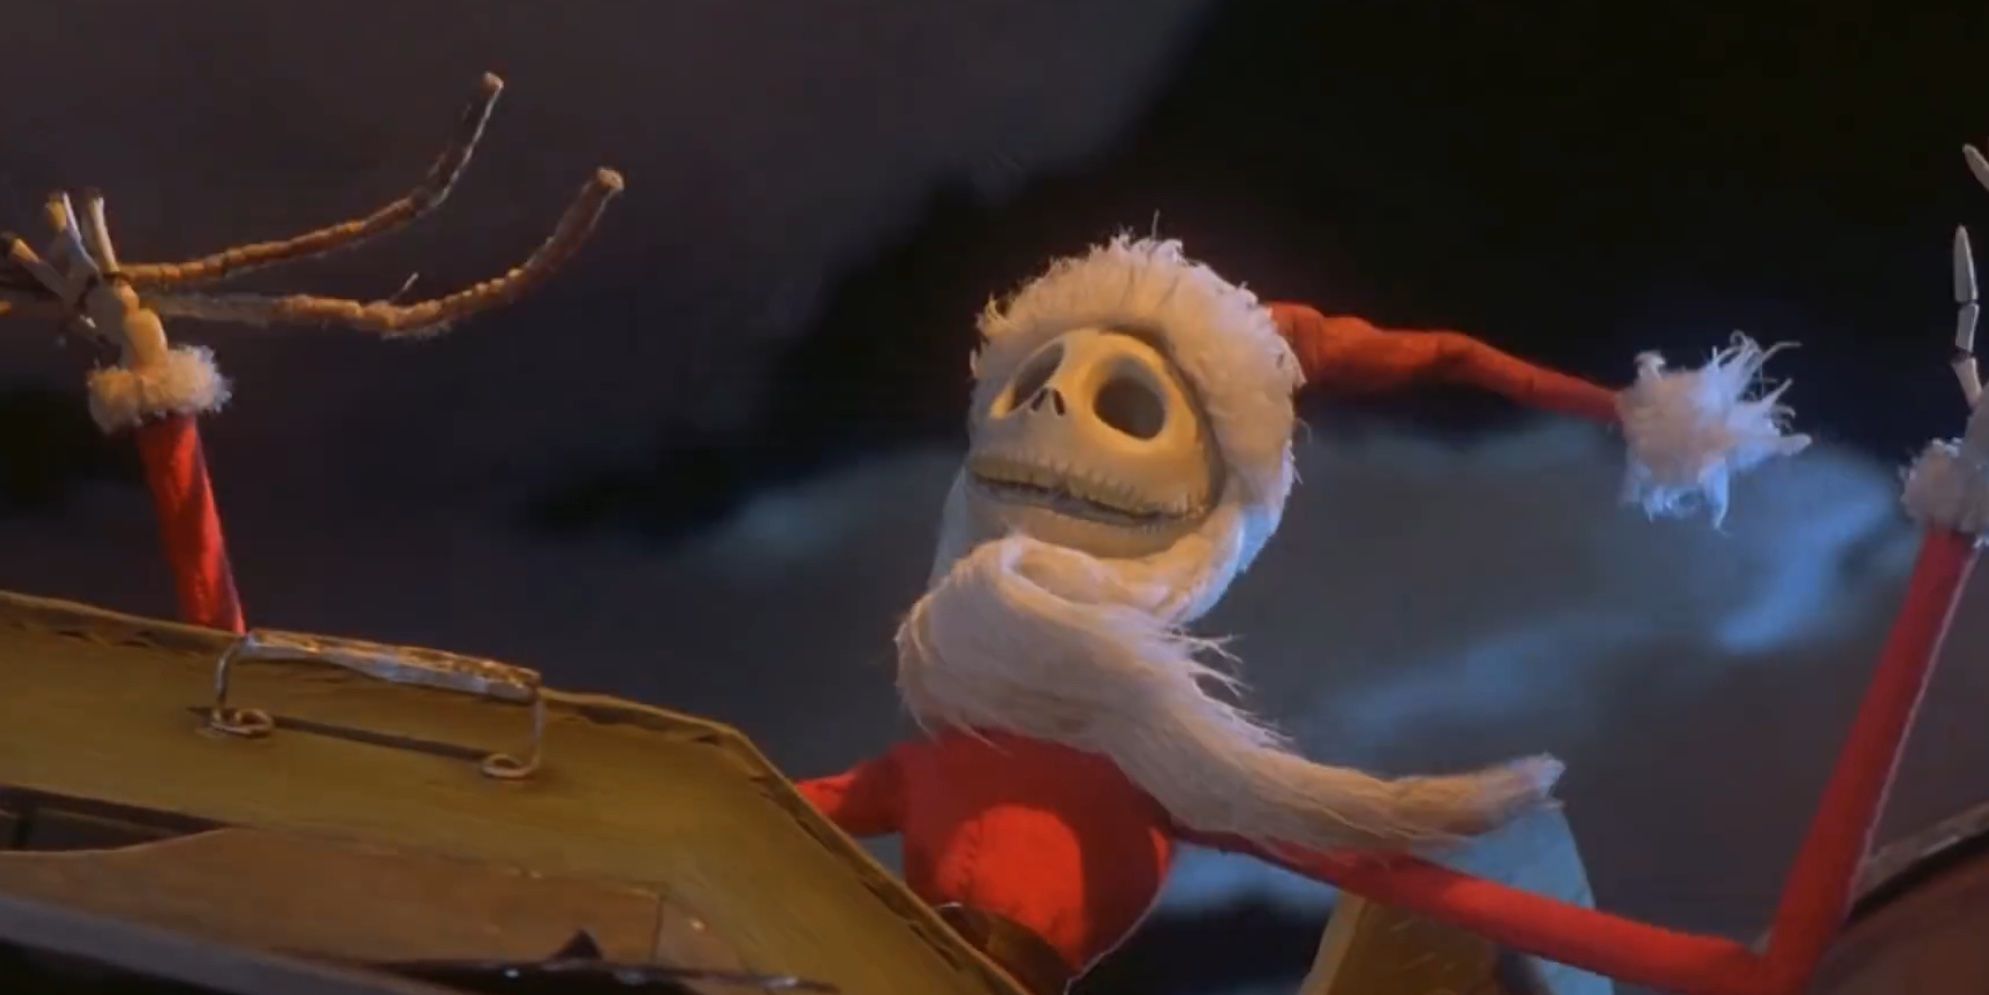 A skeleton dressed as Santa sitting in a sleigh in 'The Nightmare Before Christmas'